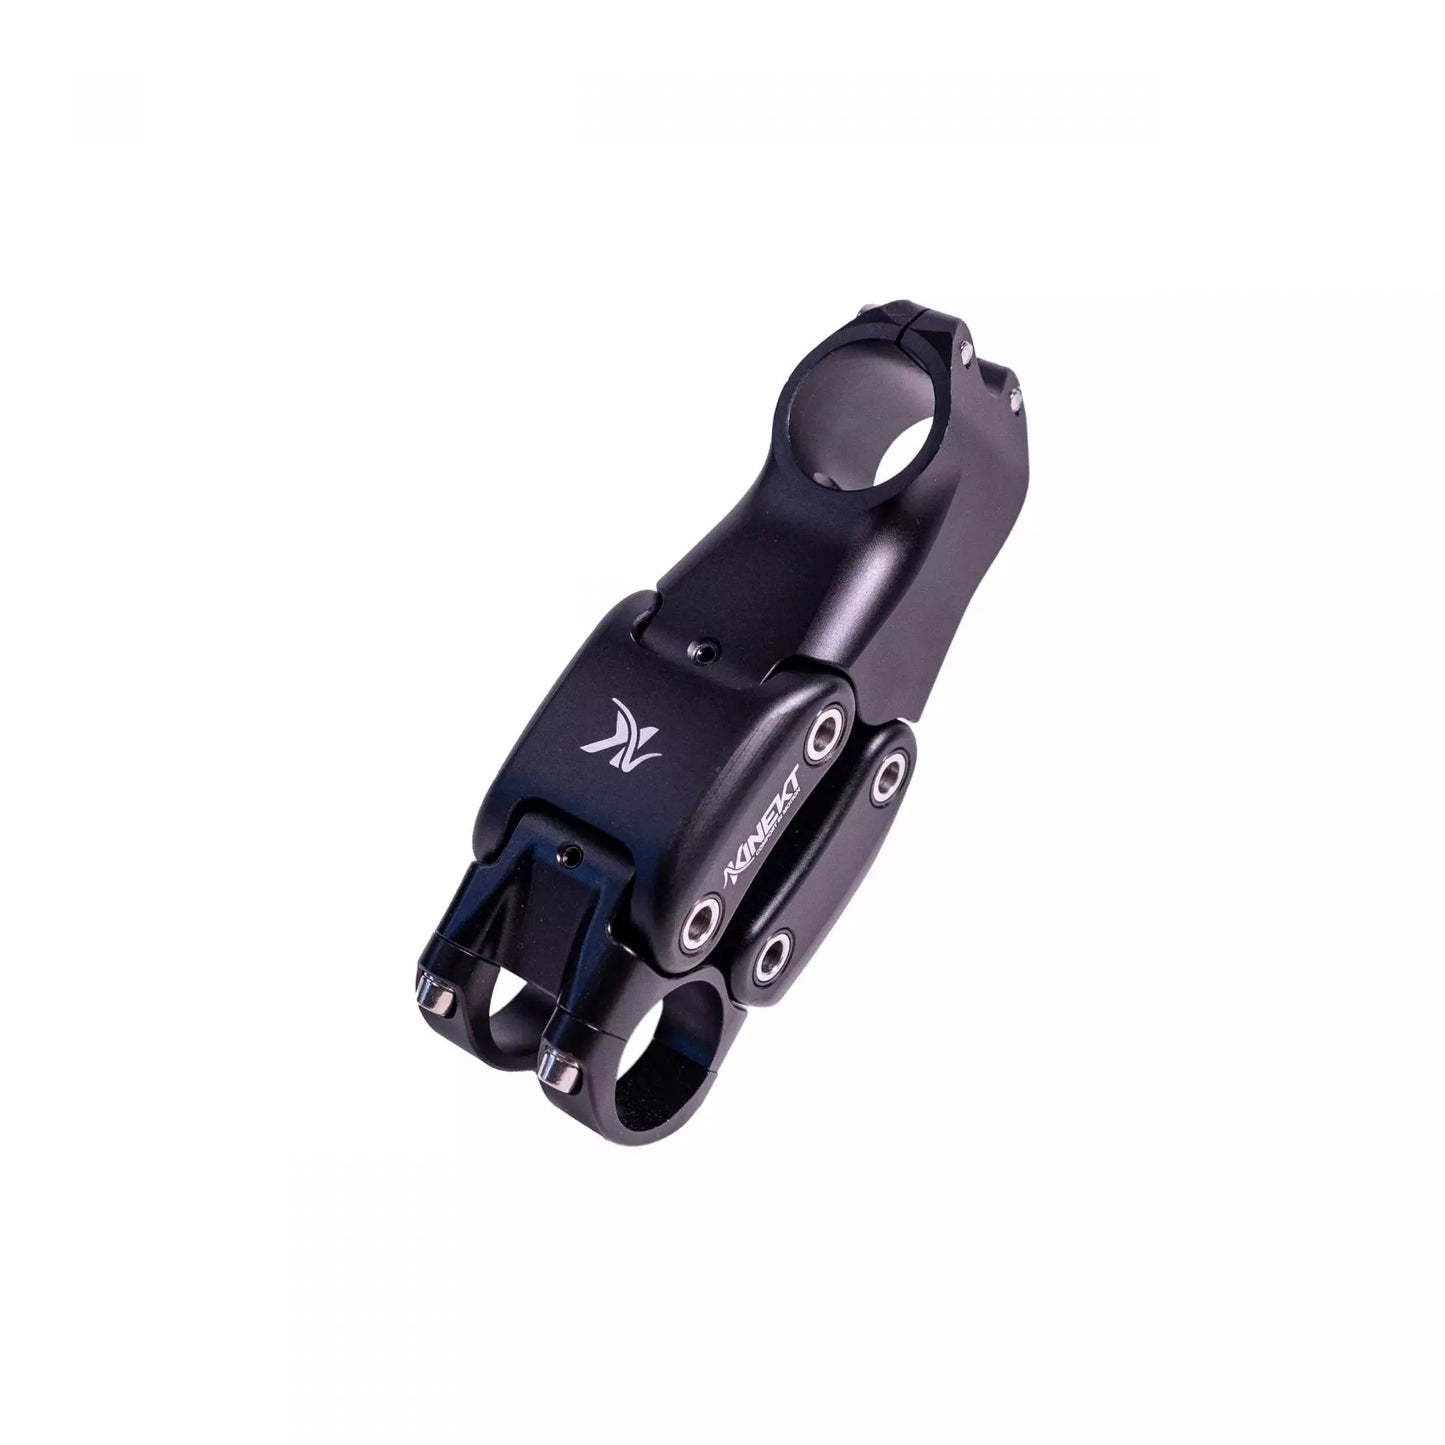 Suspension Stem - Kinekt with 100mmx30 degree high rise - 31.8mm clamp